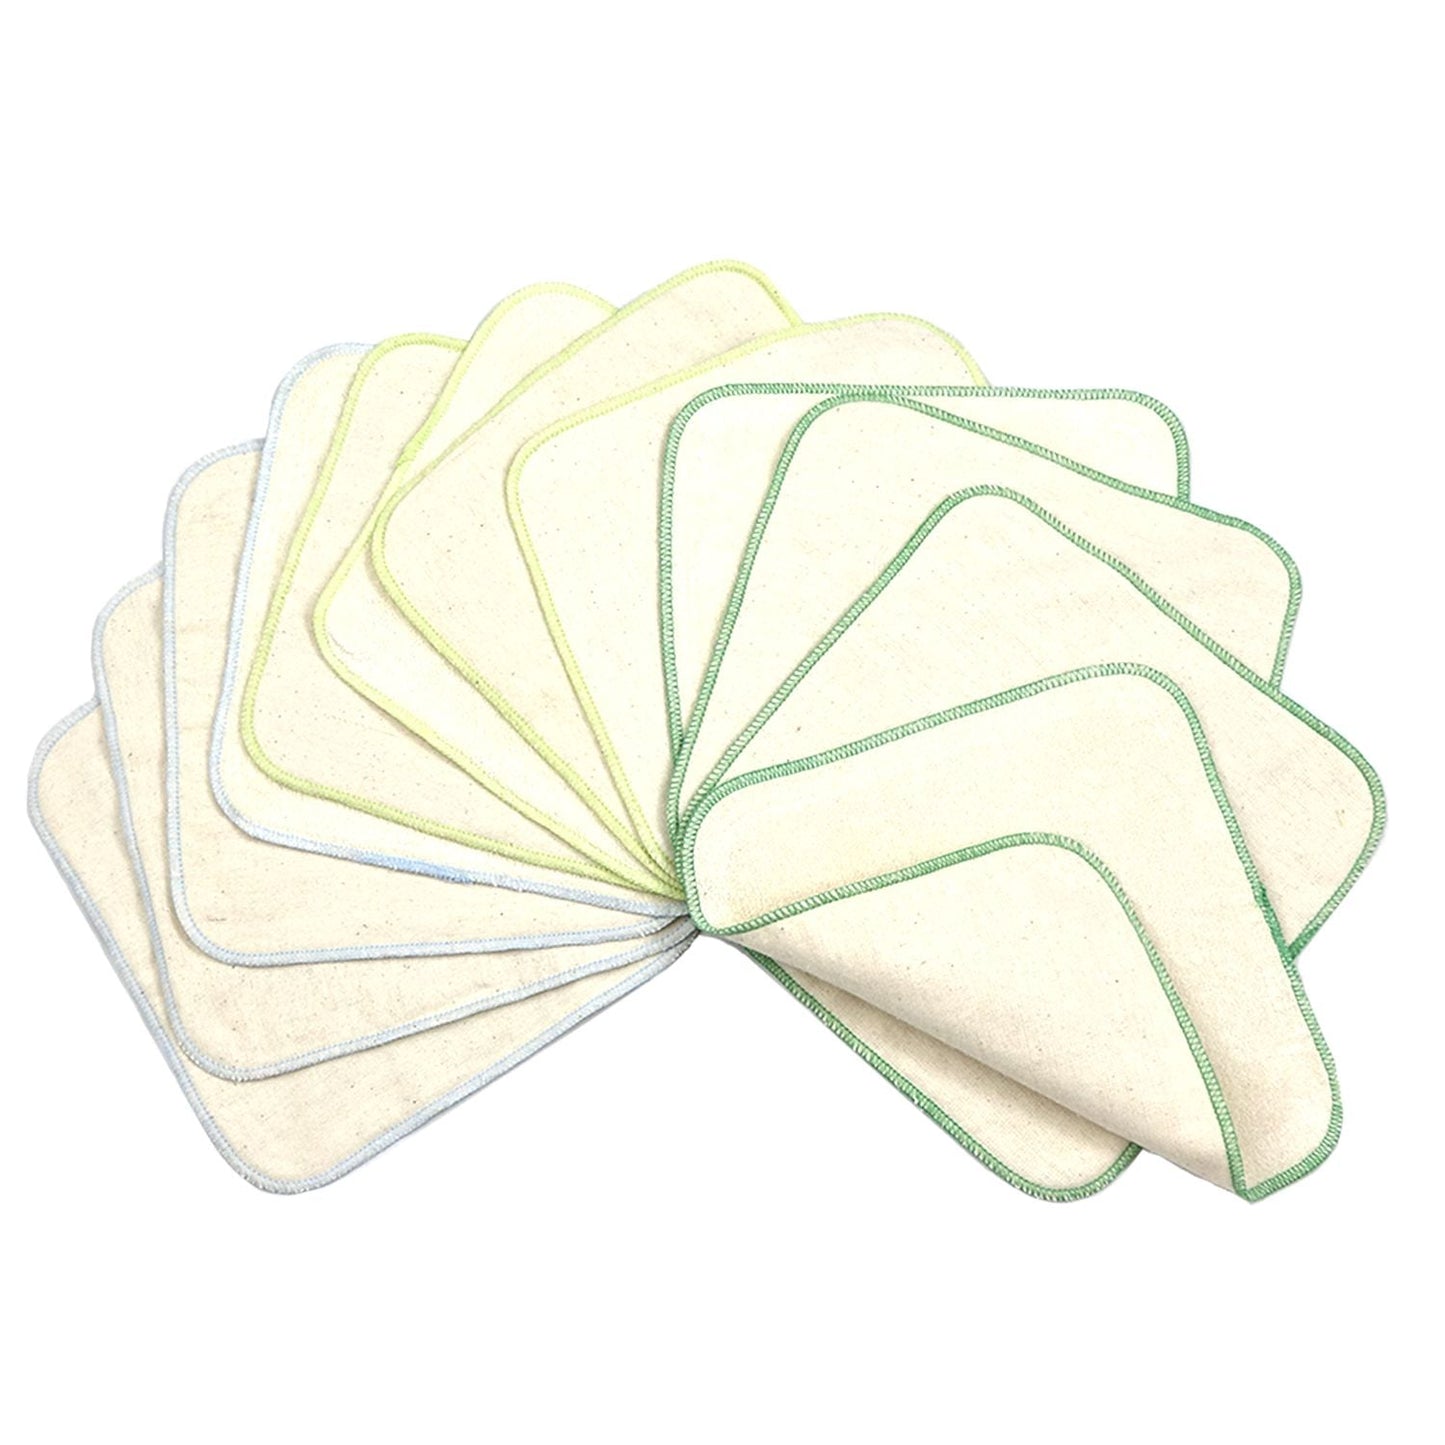 Avo & Cado Flannel Cotton Reusable Wipes - 12 Pack-Accessories-Avo & Cado-Green Edging-The Nappy Market